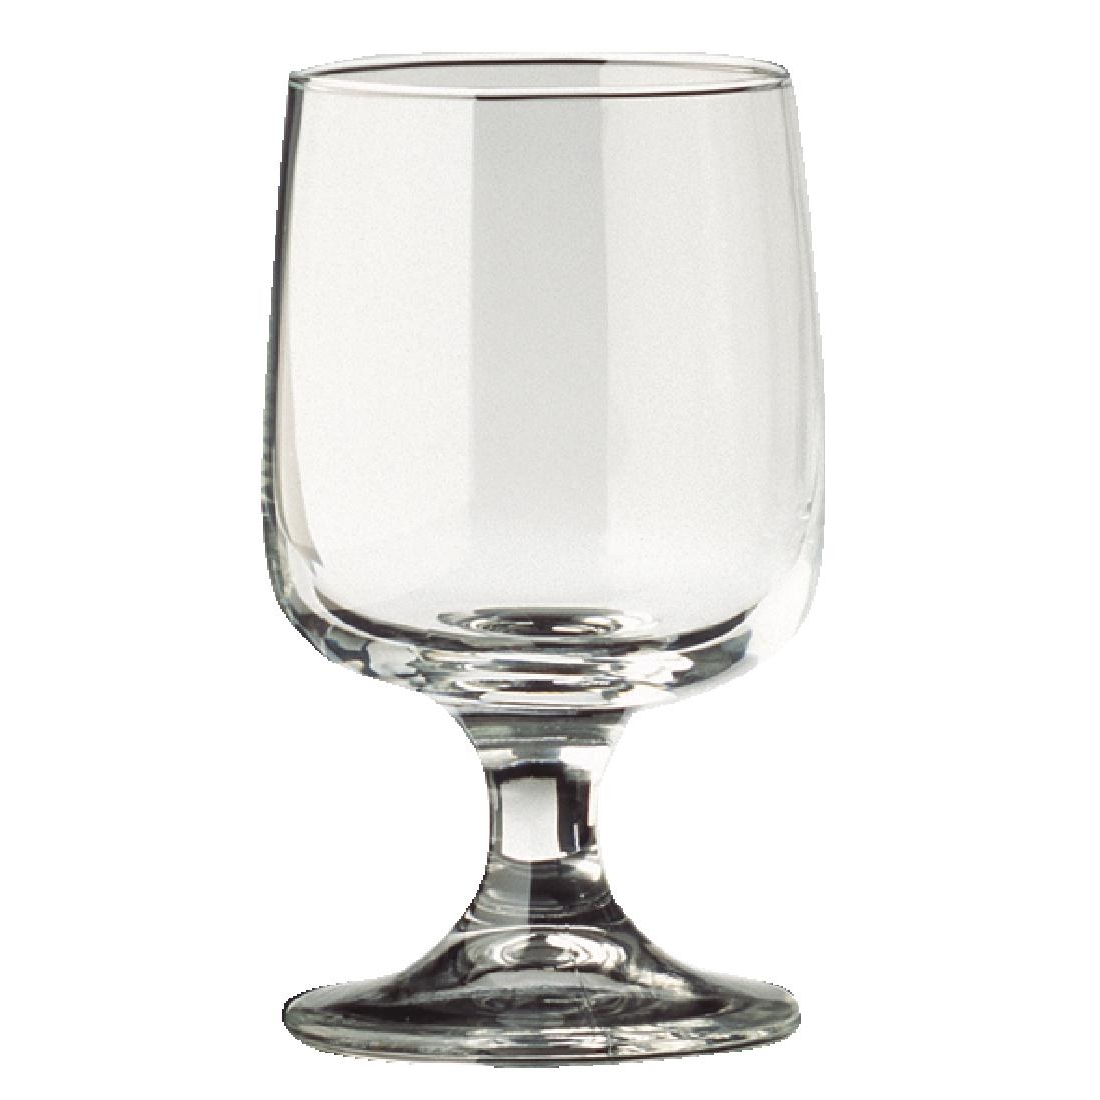 Utopia Executive Stemmed Beer Glasses 280ml CE Marked